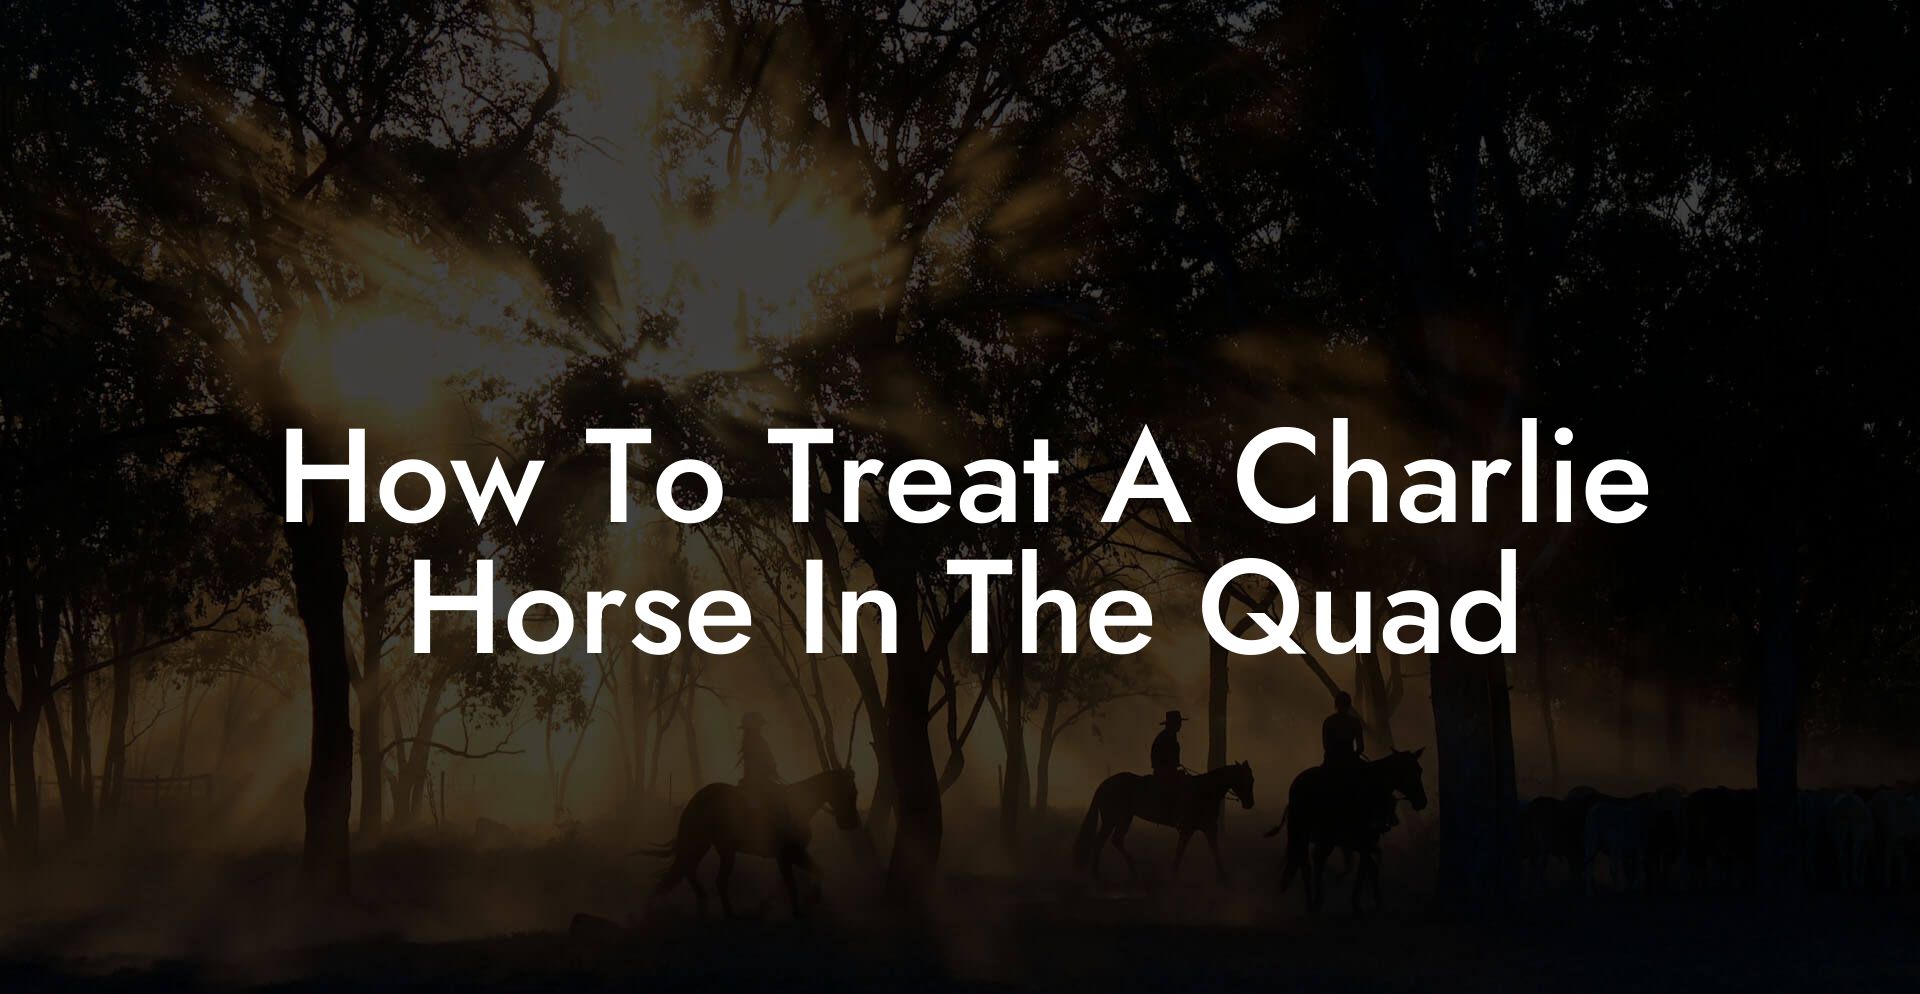 How To Treat A Charlie Horse In The Quad